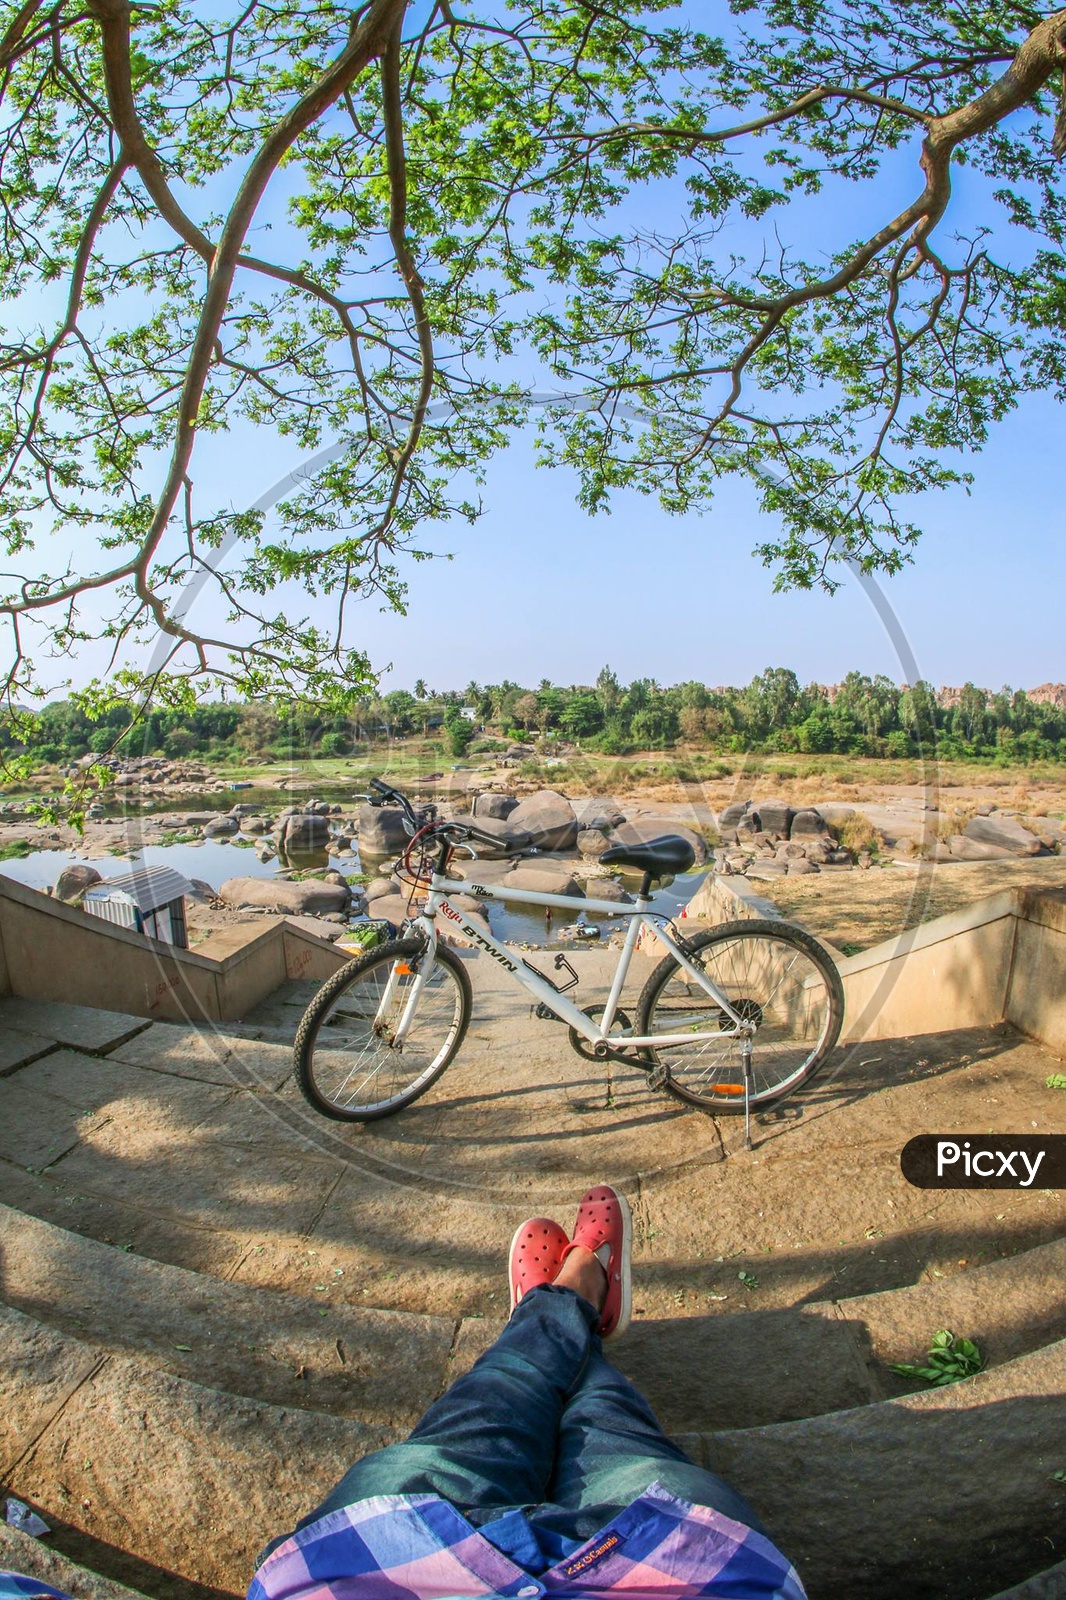 A Bicycle On the Bank of Tungabadra River Bank in Hampi